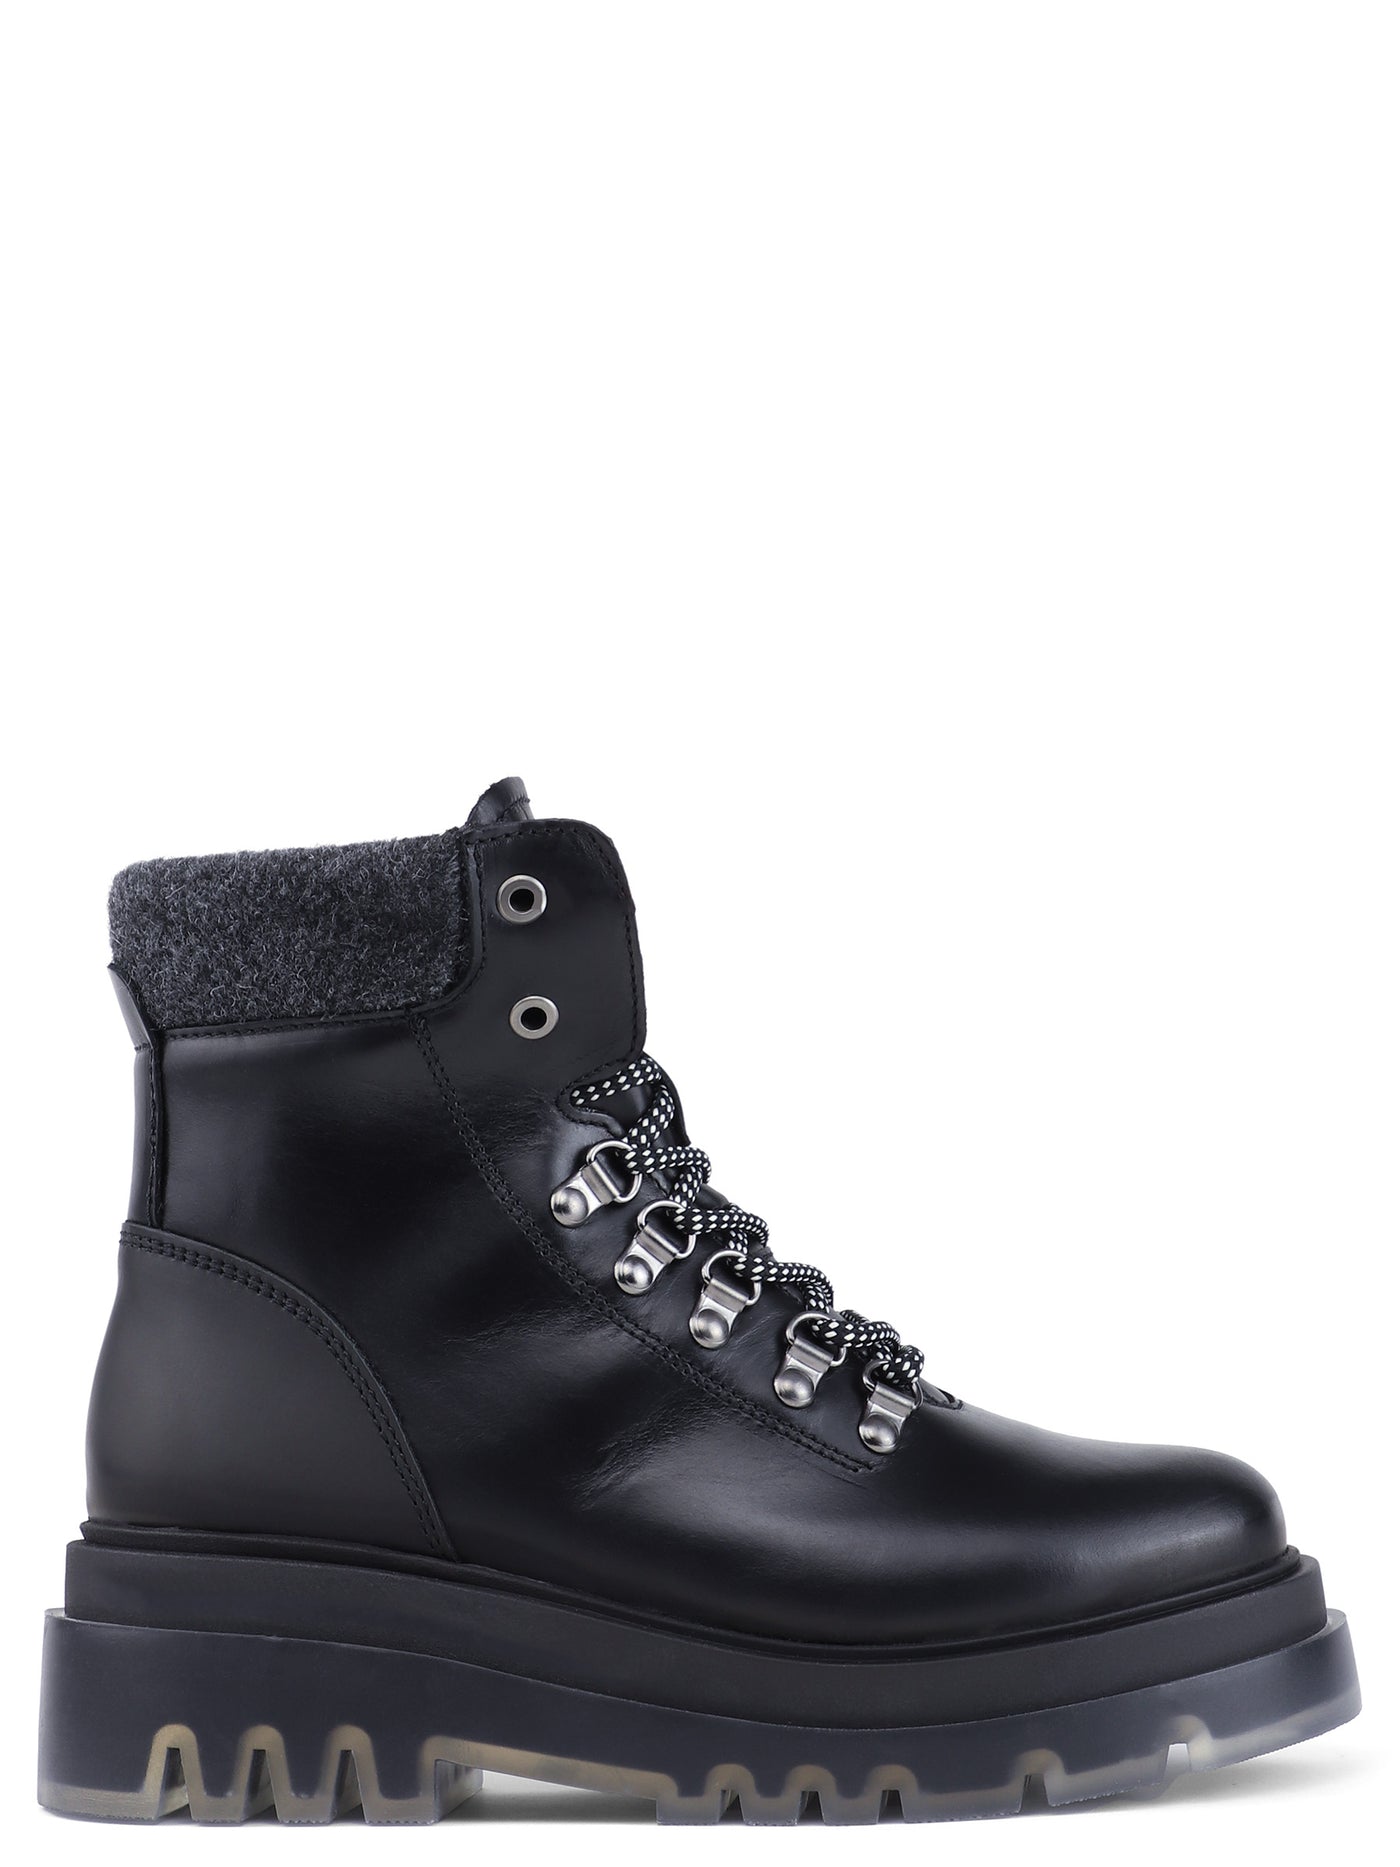 Vienna Women's Lace-Up Boot